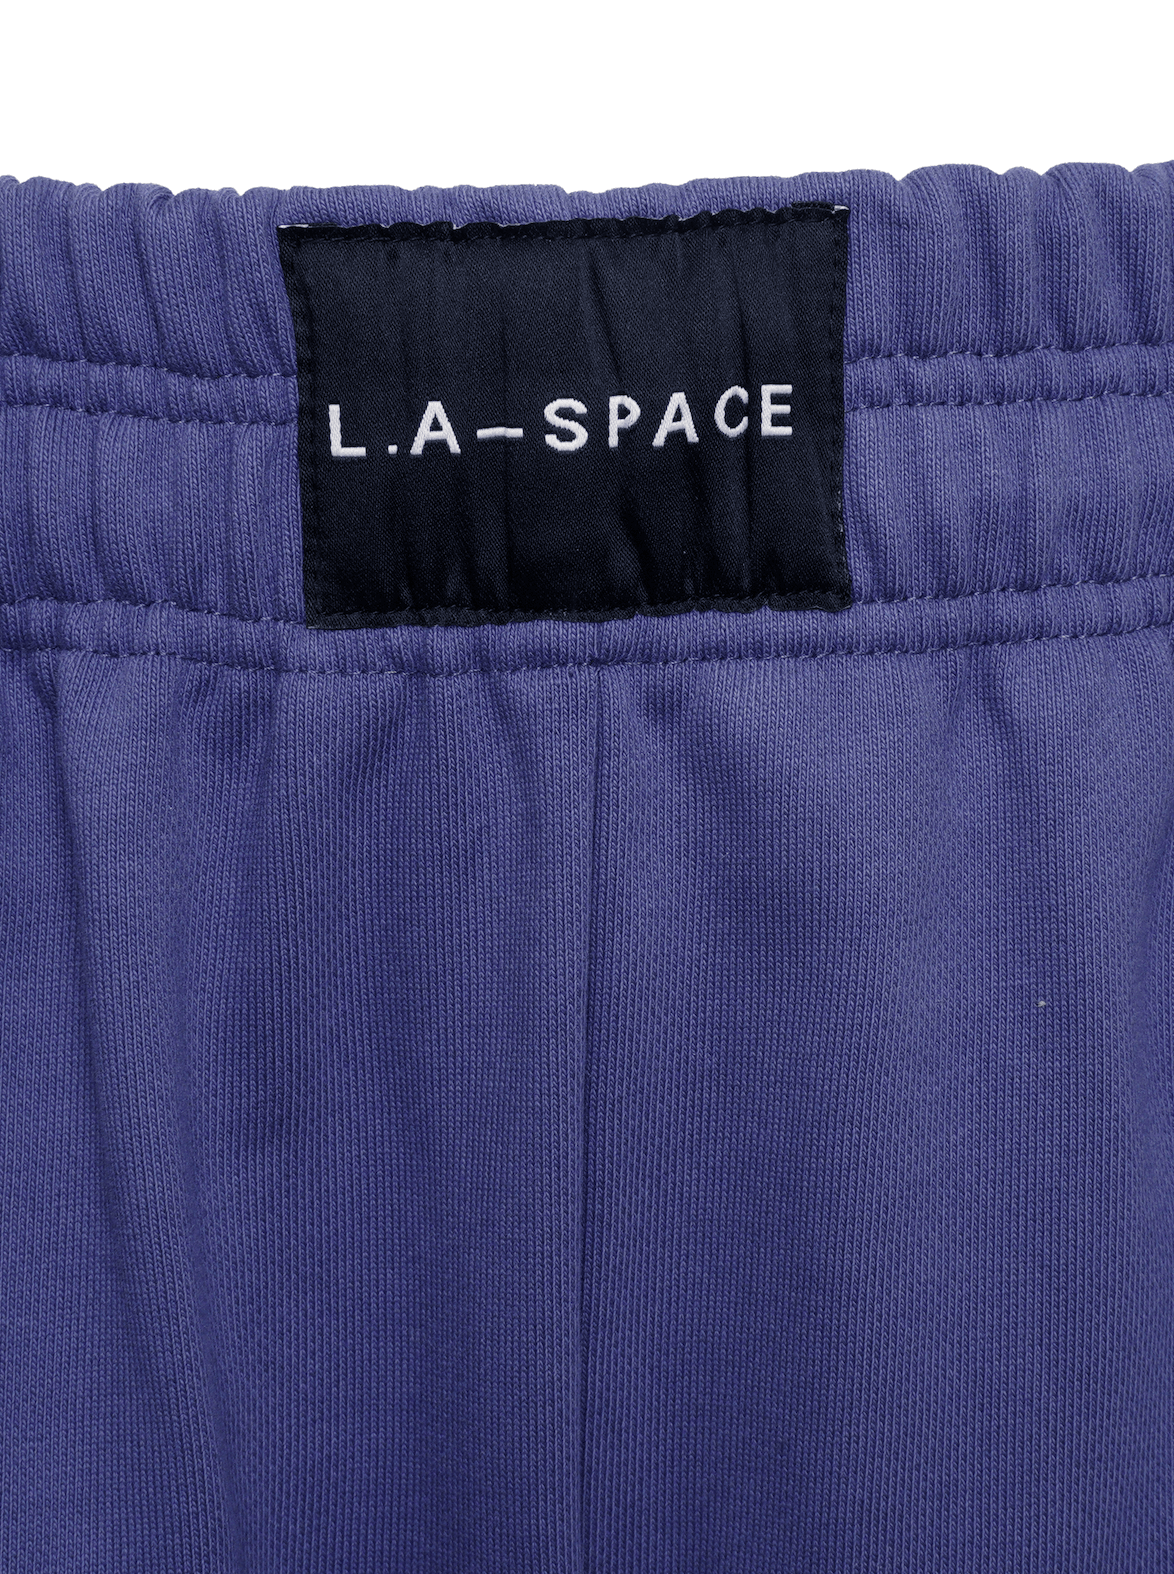 ‘L.A- SPACE’ RELAXED FIT JOGGERS NAVY